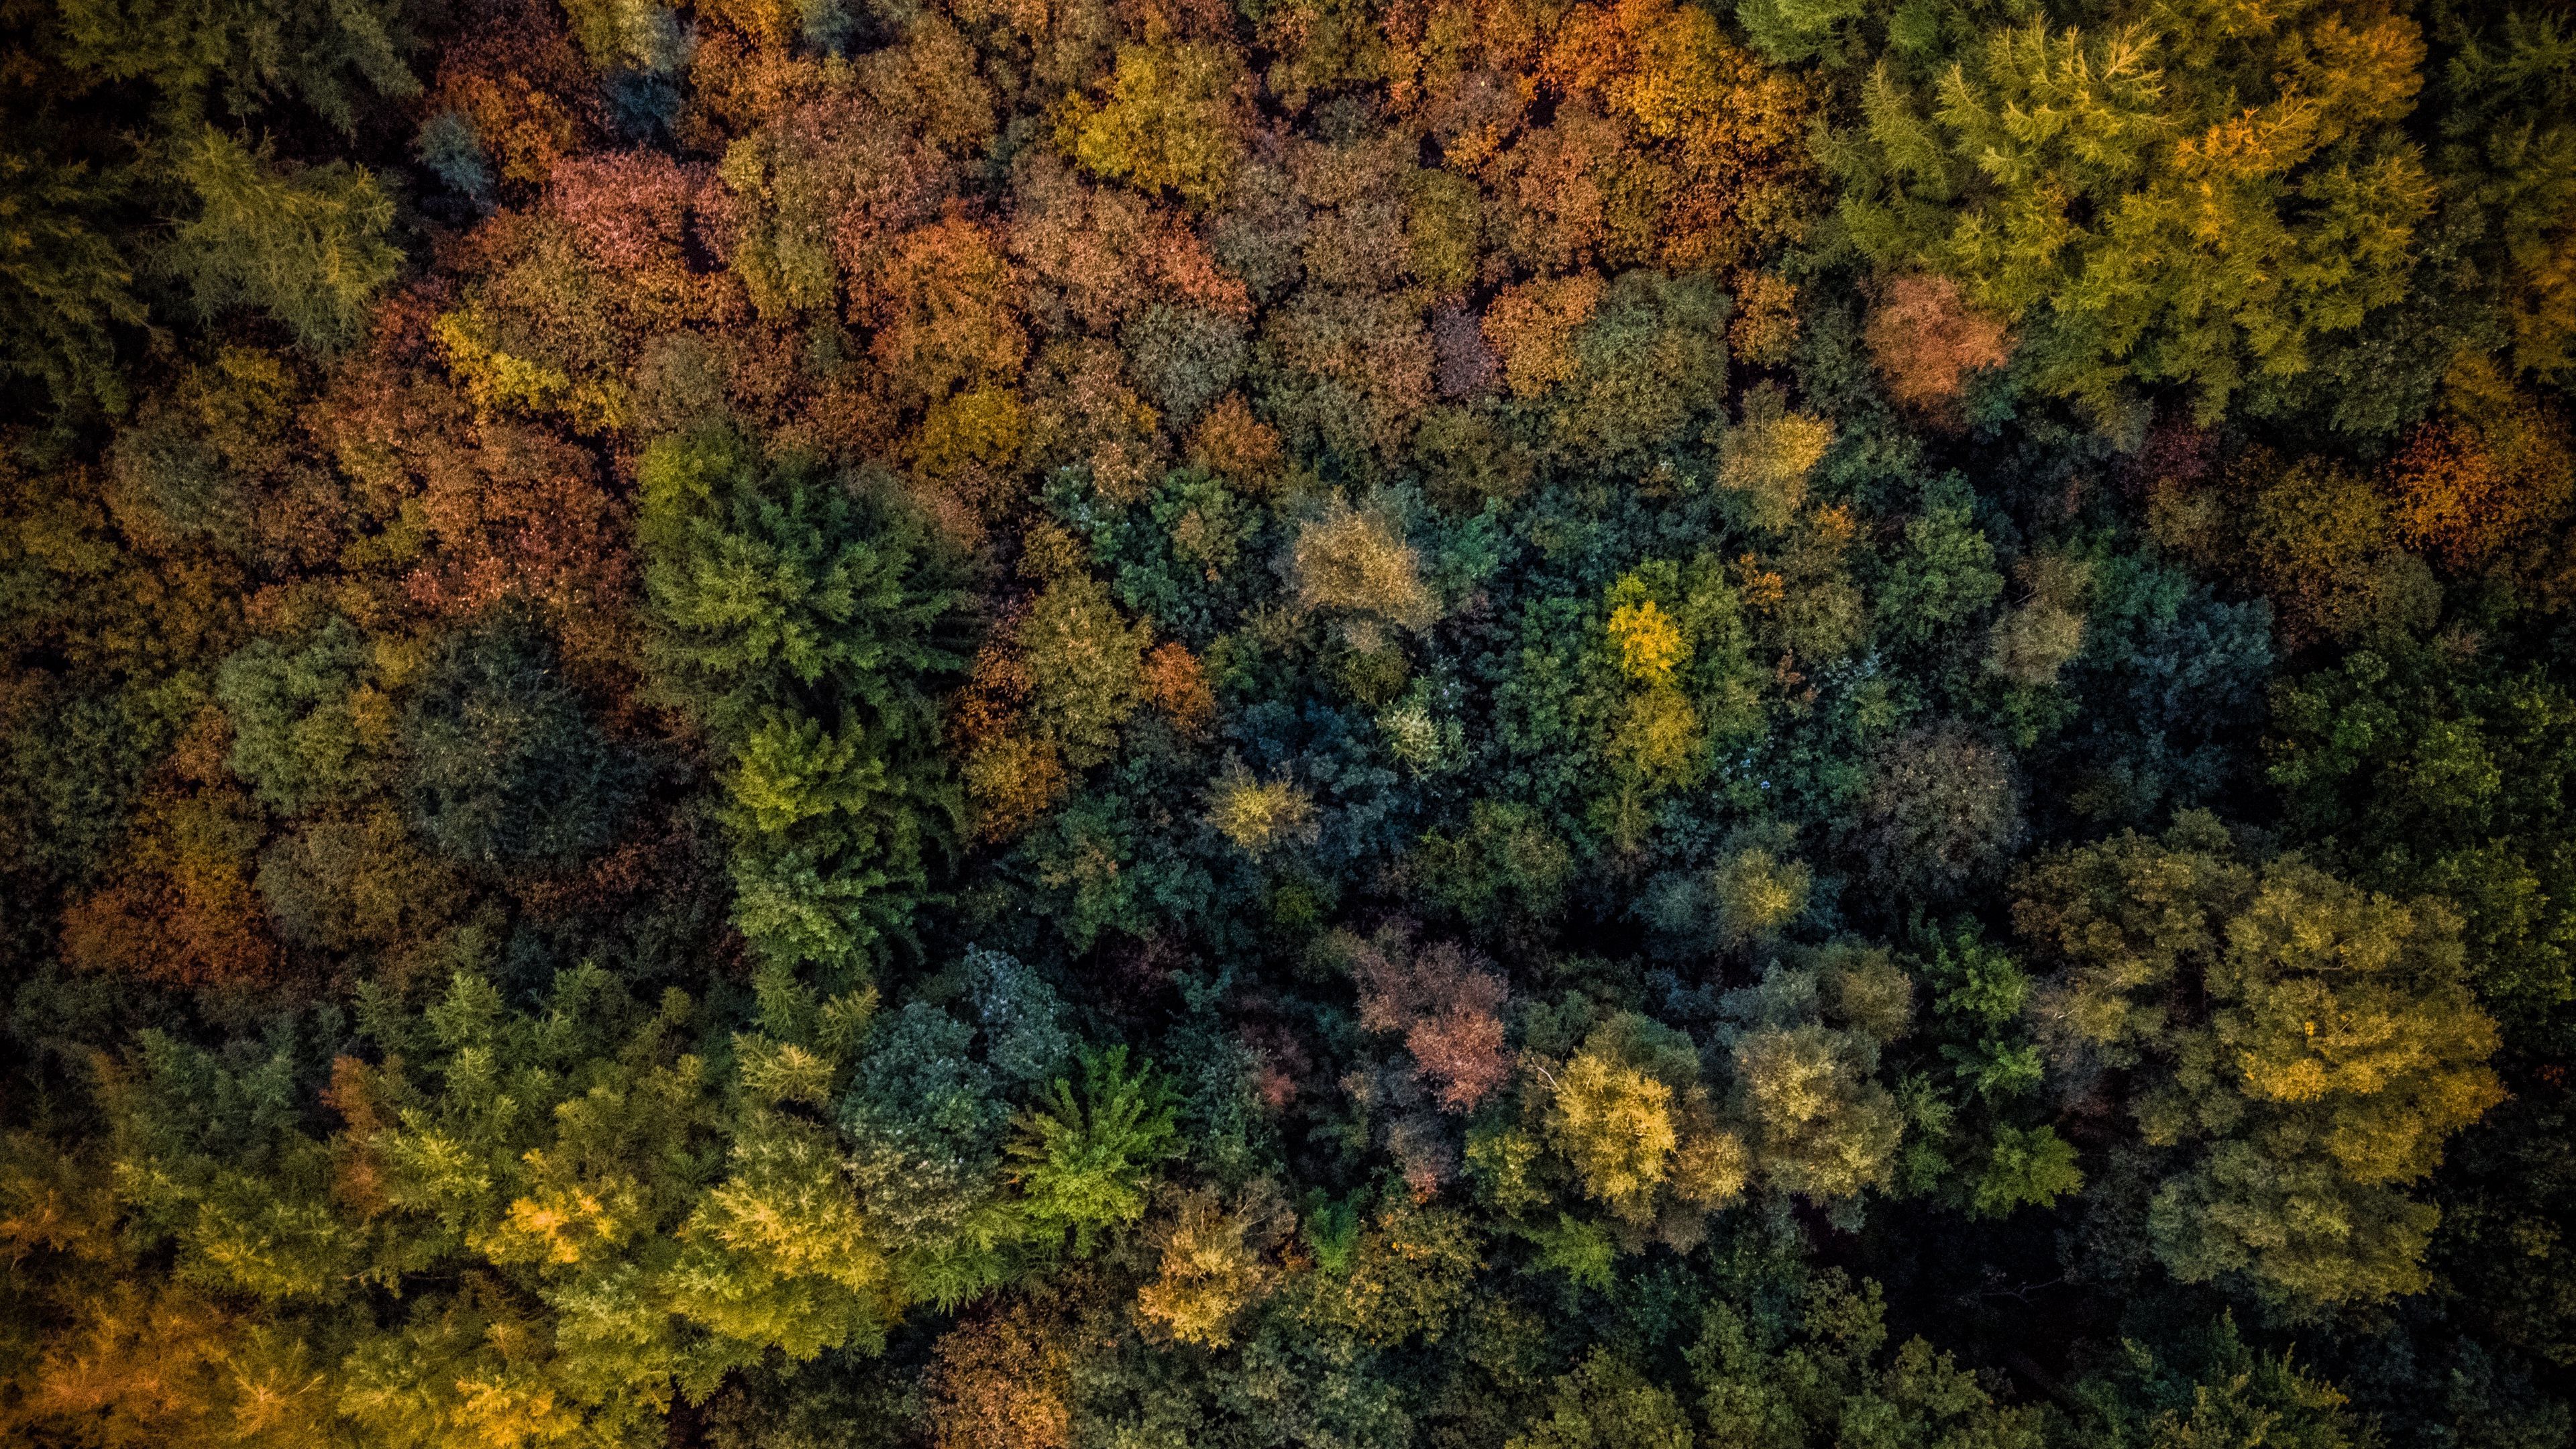 Download wallpaper 3840x2160 trees, view from above, autumn 4k uhd 16:9 HD background